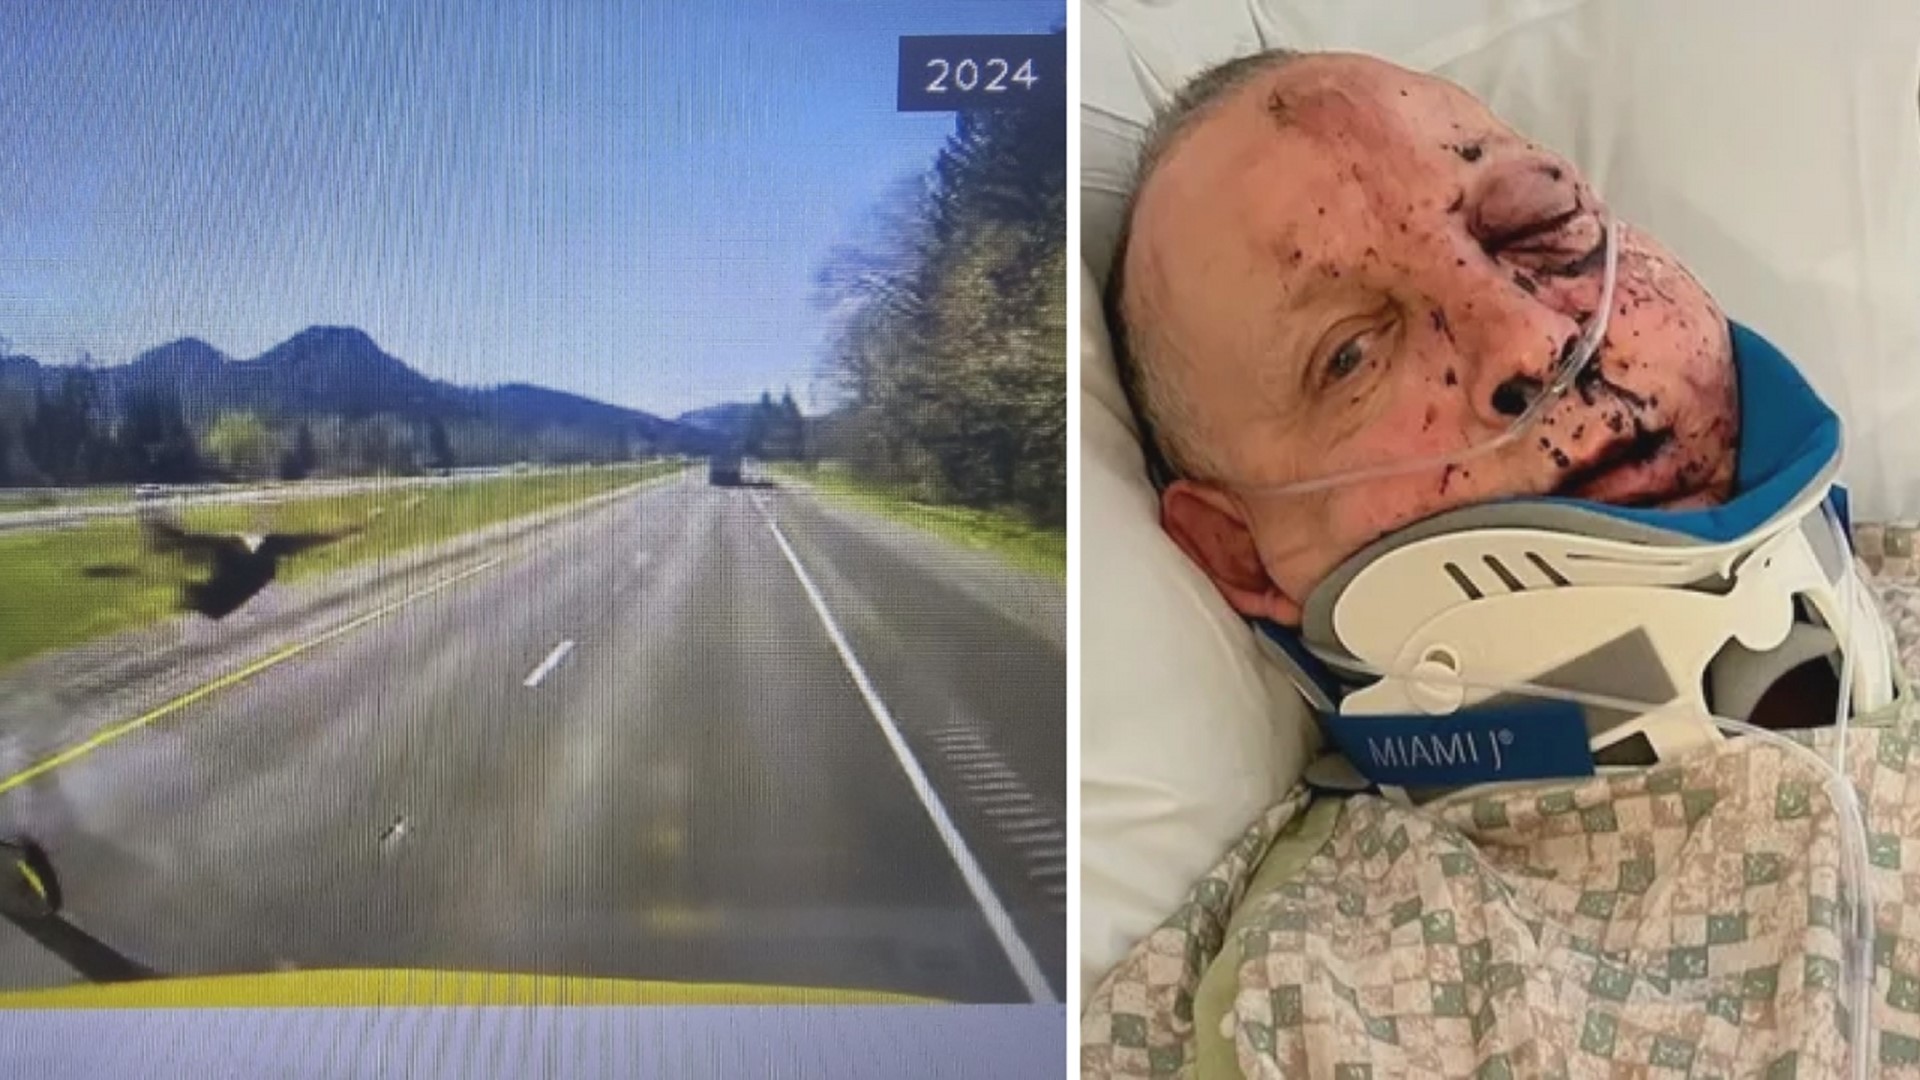 David Duell was driving on I-5 in Douglas County when the turkey crashed through the front windshield and hit him in the face.